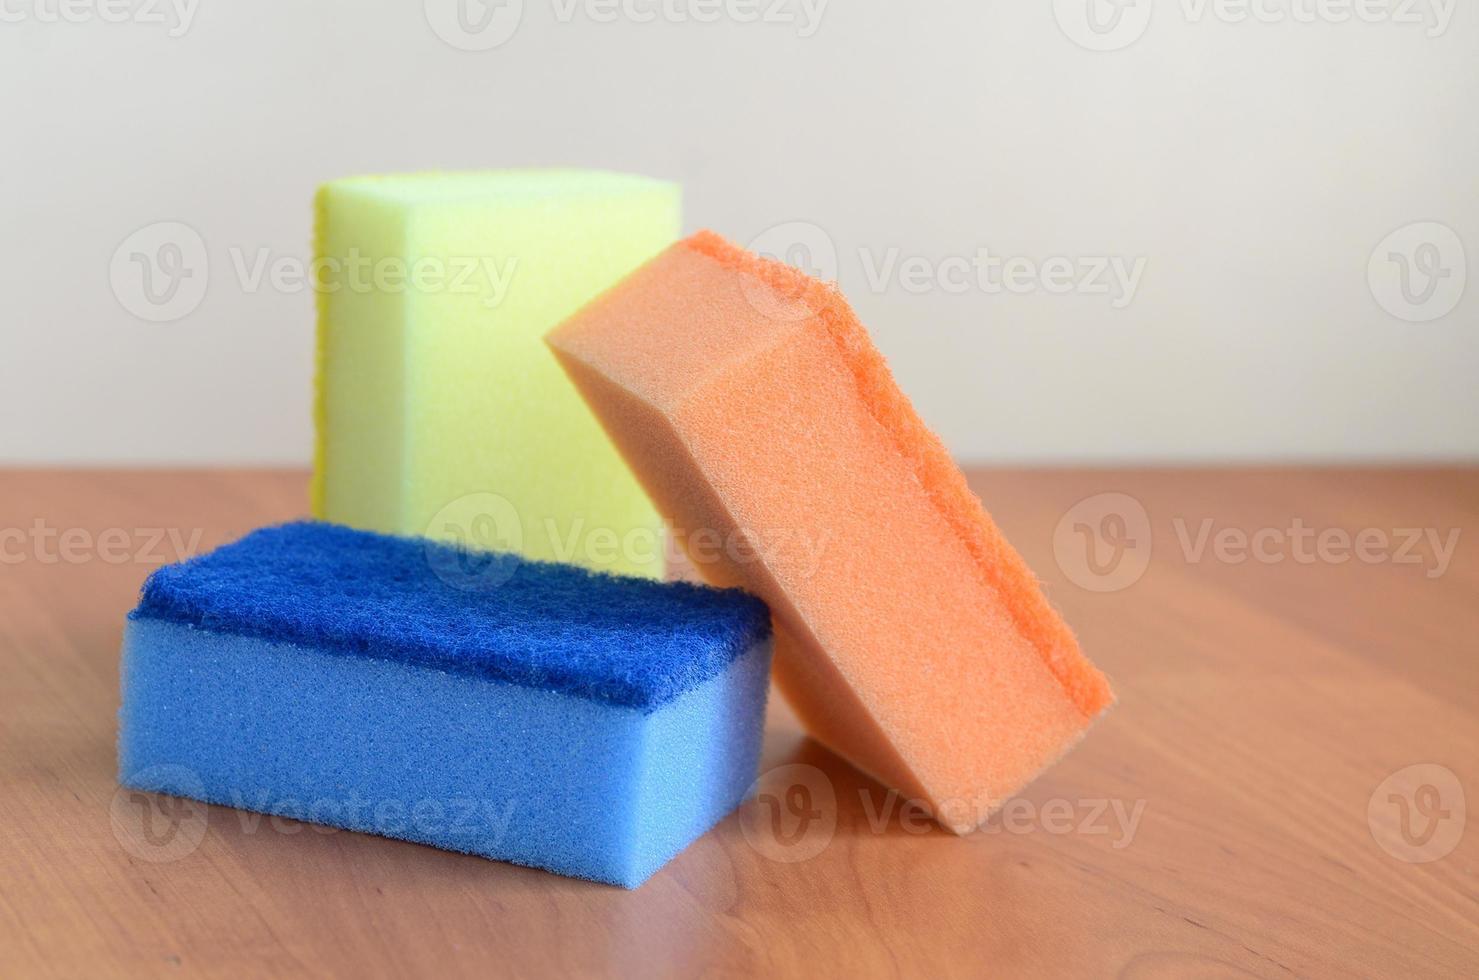 A few kitchen sponges lie on a wooden kitchen countertop. Colorful objects for washing dishes and cleaning in the house are ready for use photo